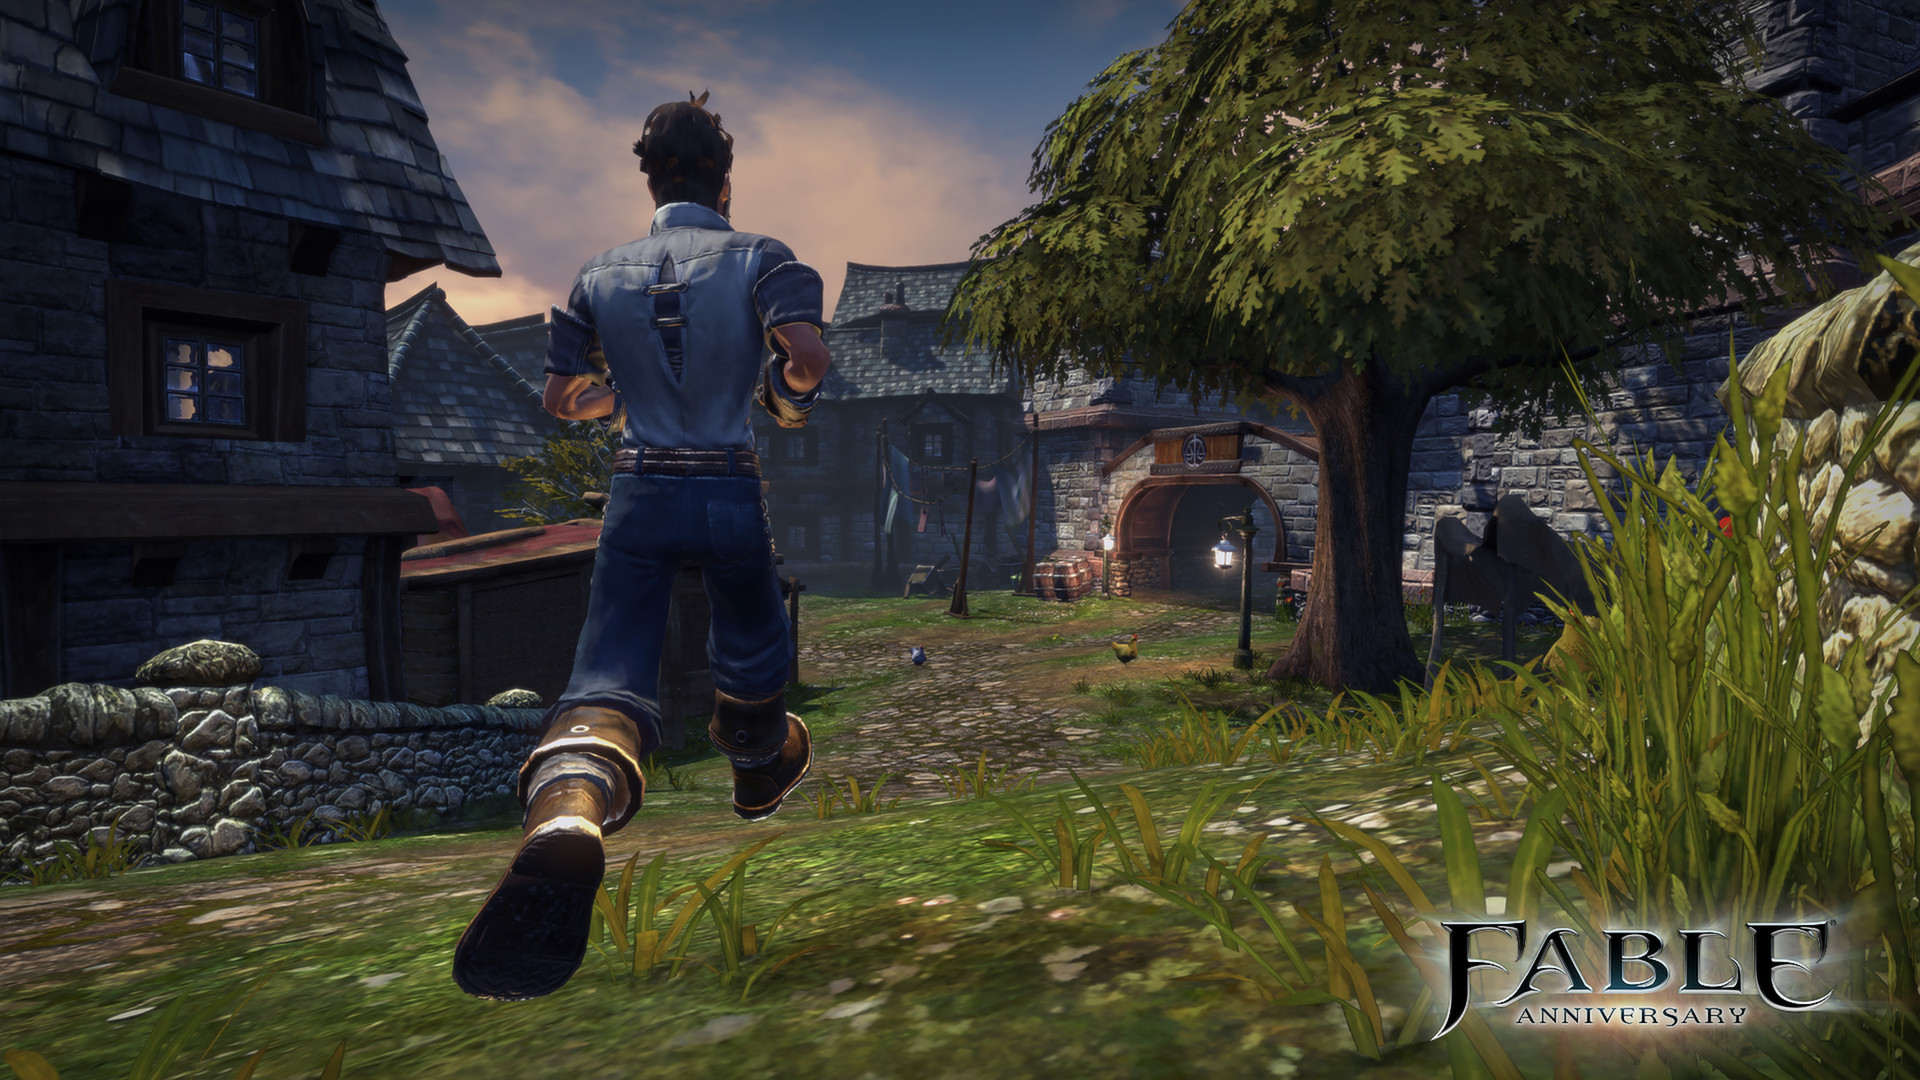 fable 2 pc emulator download